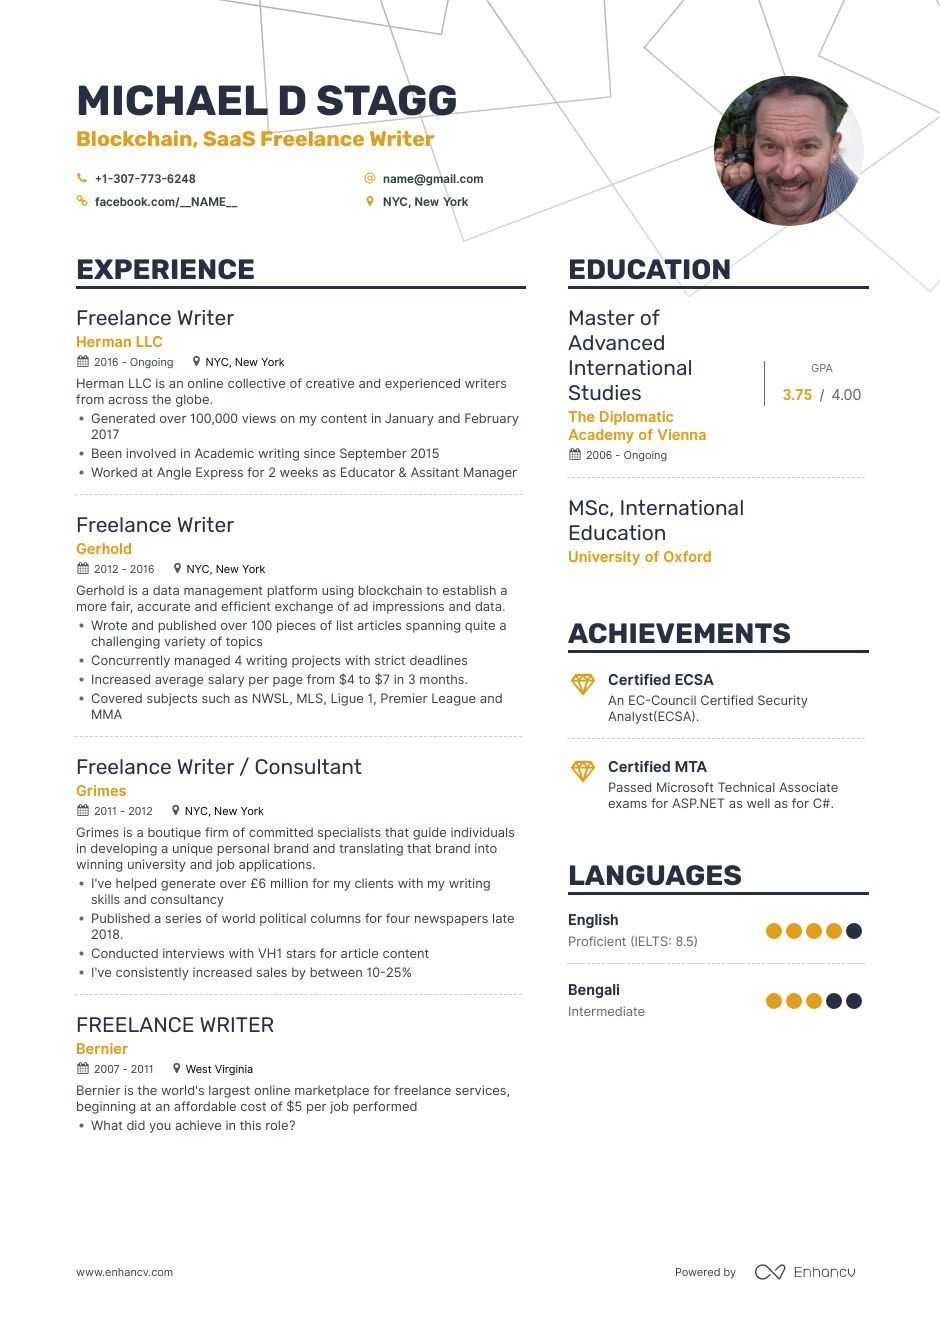 Content Writing Resume Sample for Freshers Freelance Writer Resume Examples and Skills You Need to Get Hired